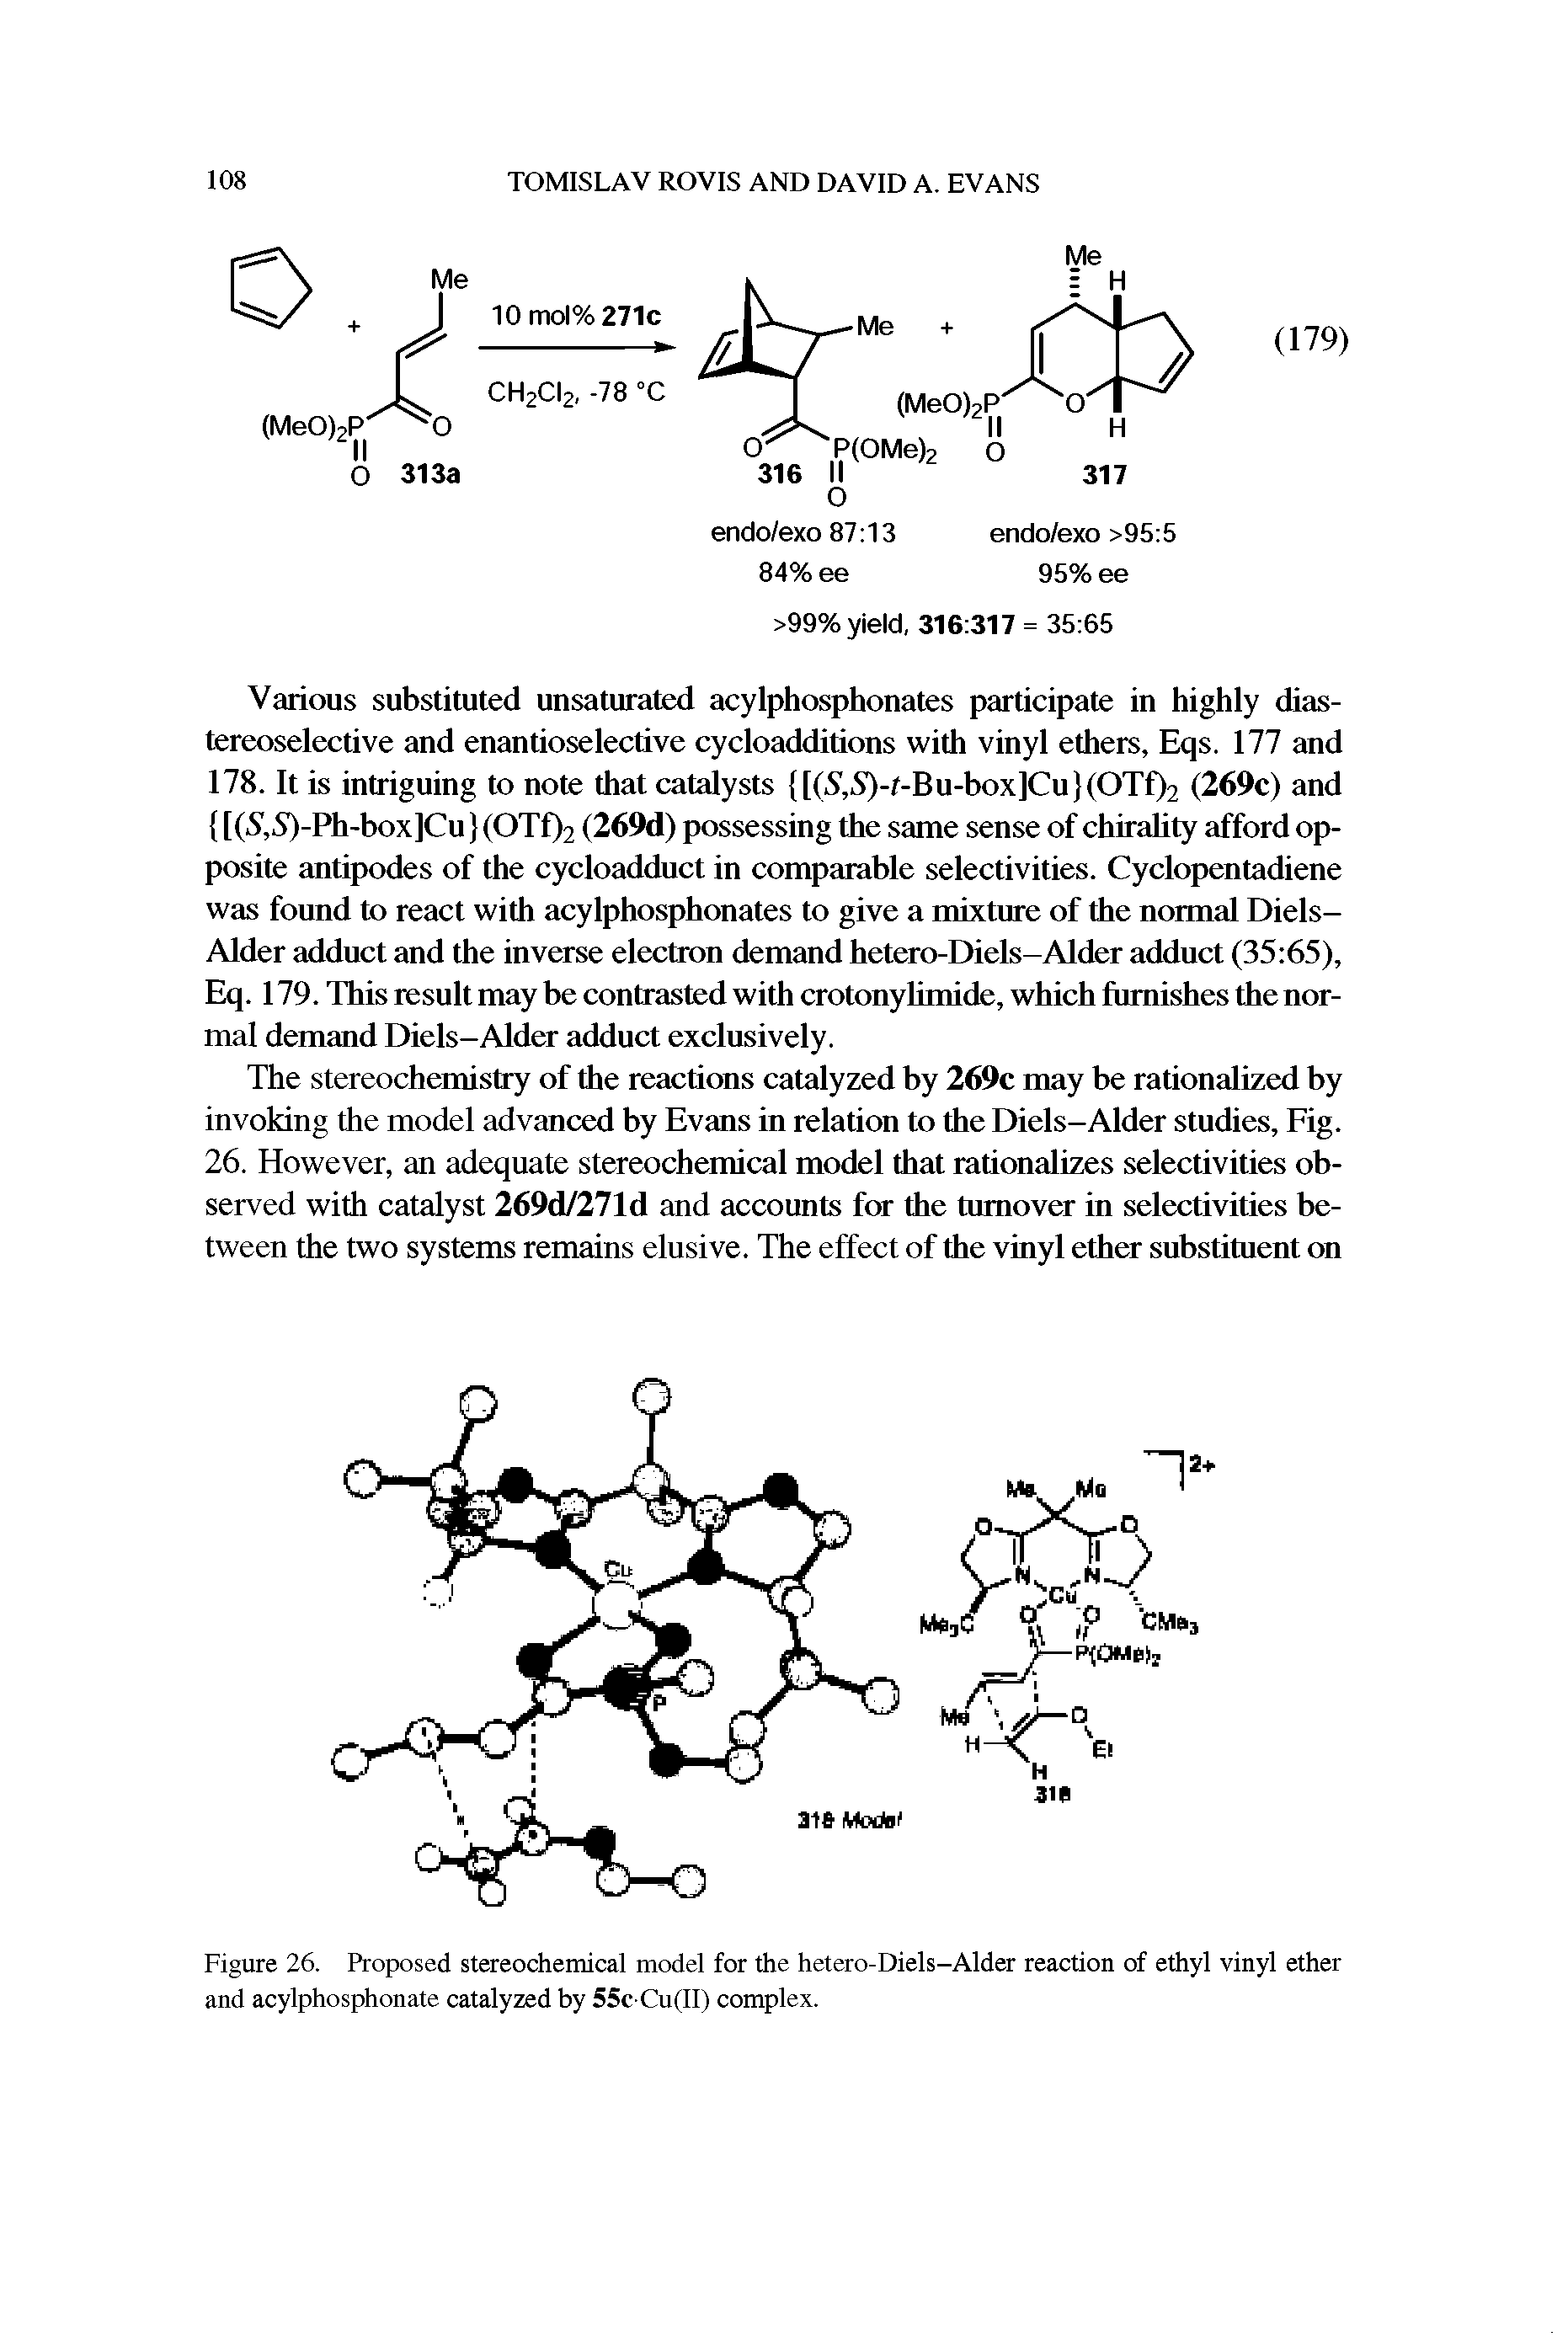 Figure 26. Proposed stereochemical model for the hetero-Diels-Alder reaction of ethyl vinyl ether and acylphosphonate catalyzed by 55c-Cu(II) complex.